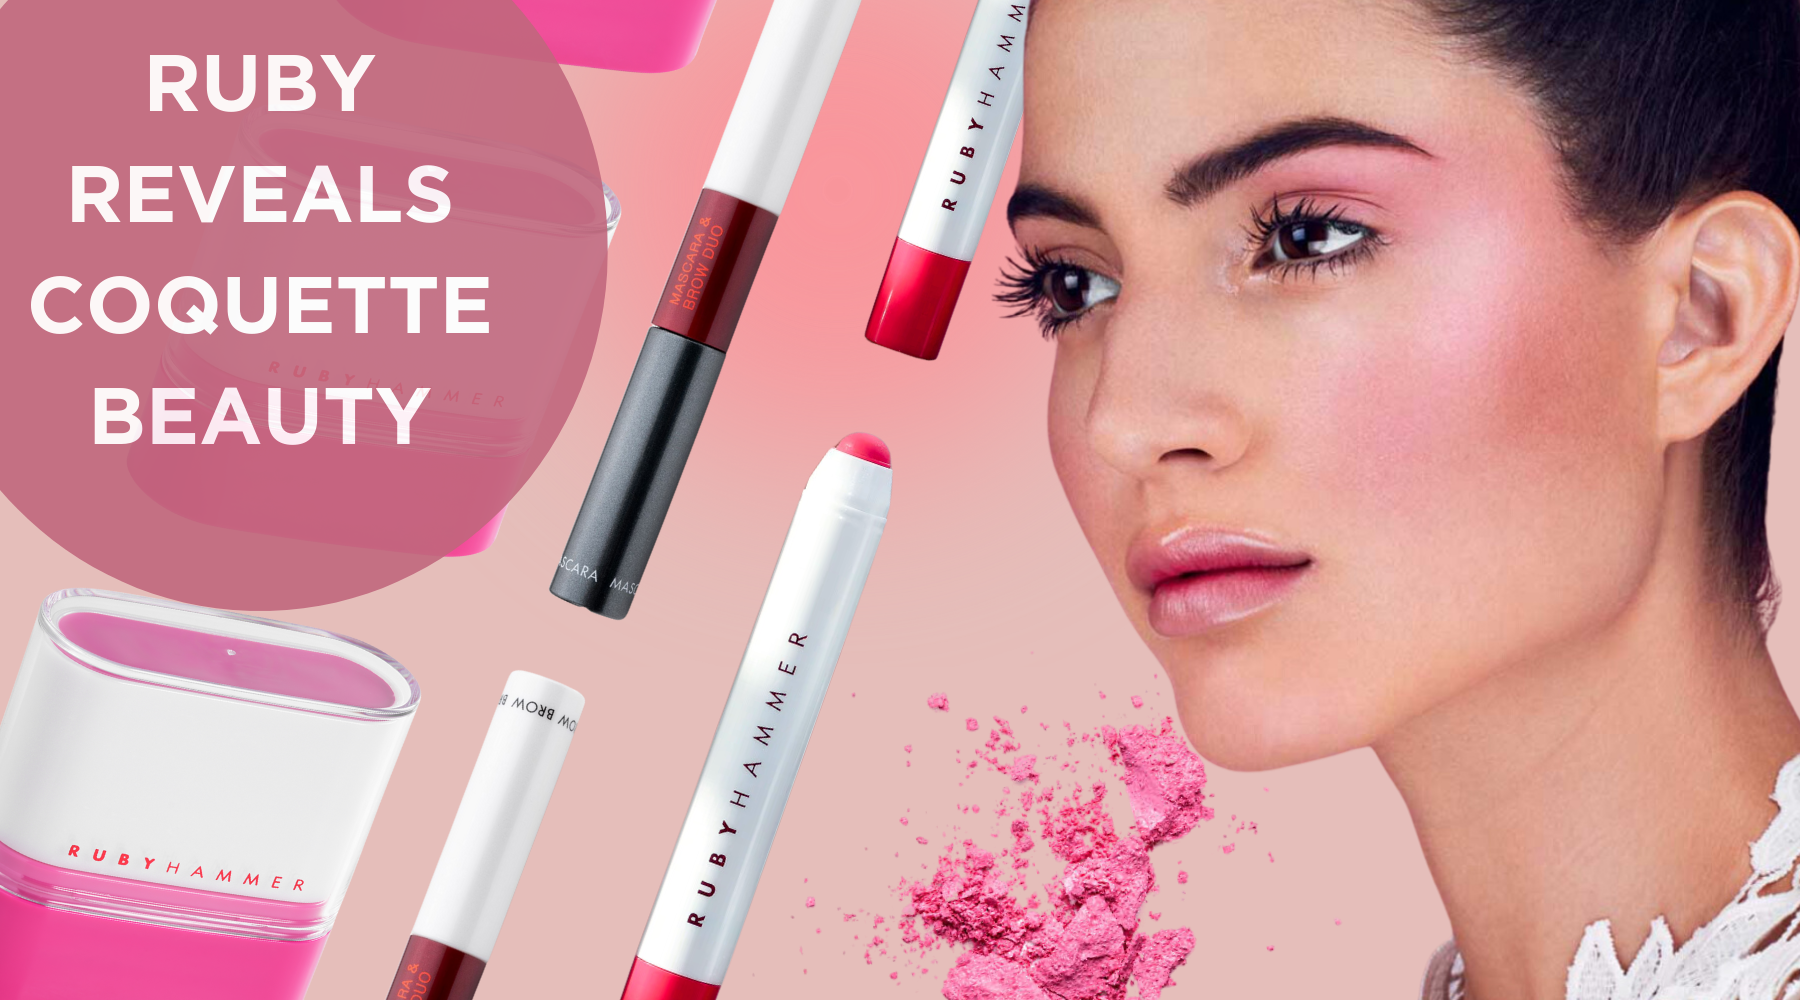 RUBY REVEALS | COQUETTE BEAUTY